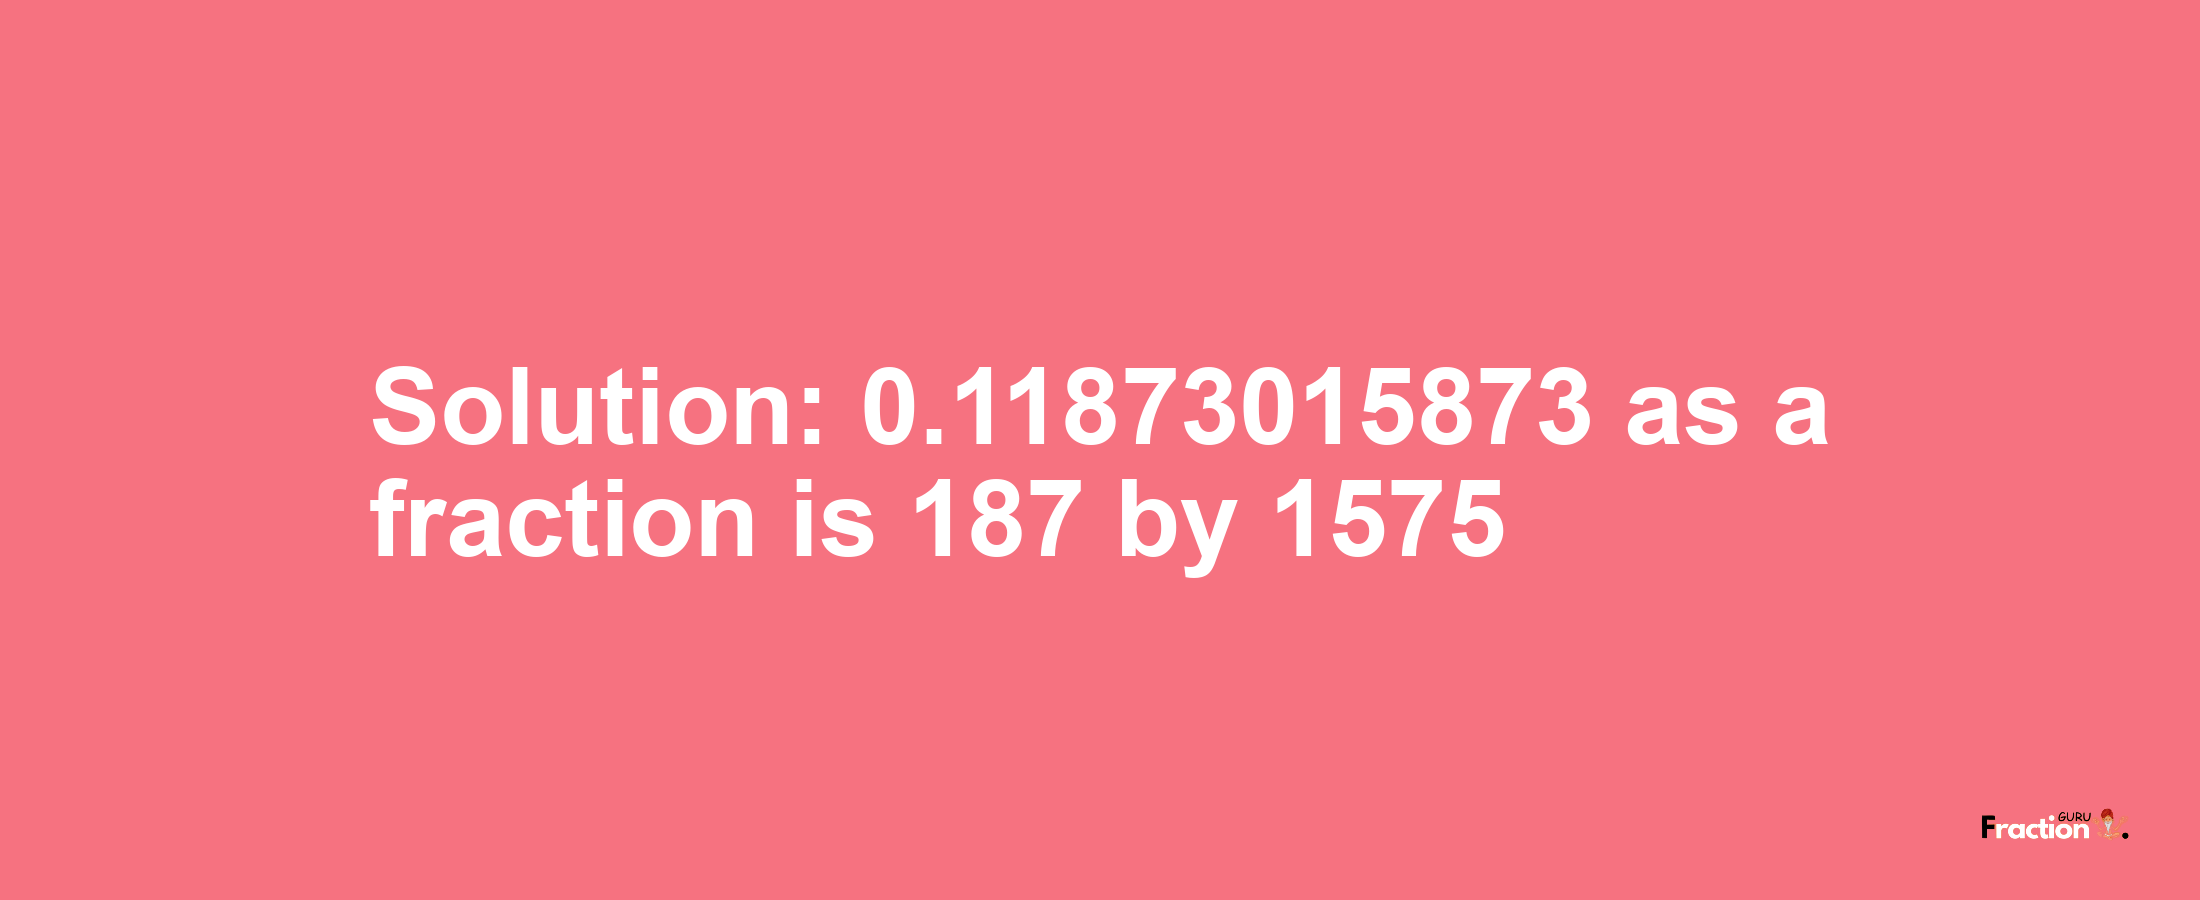 Solution:0.11873015873 as a fraction is 187/1575